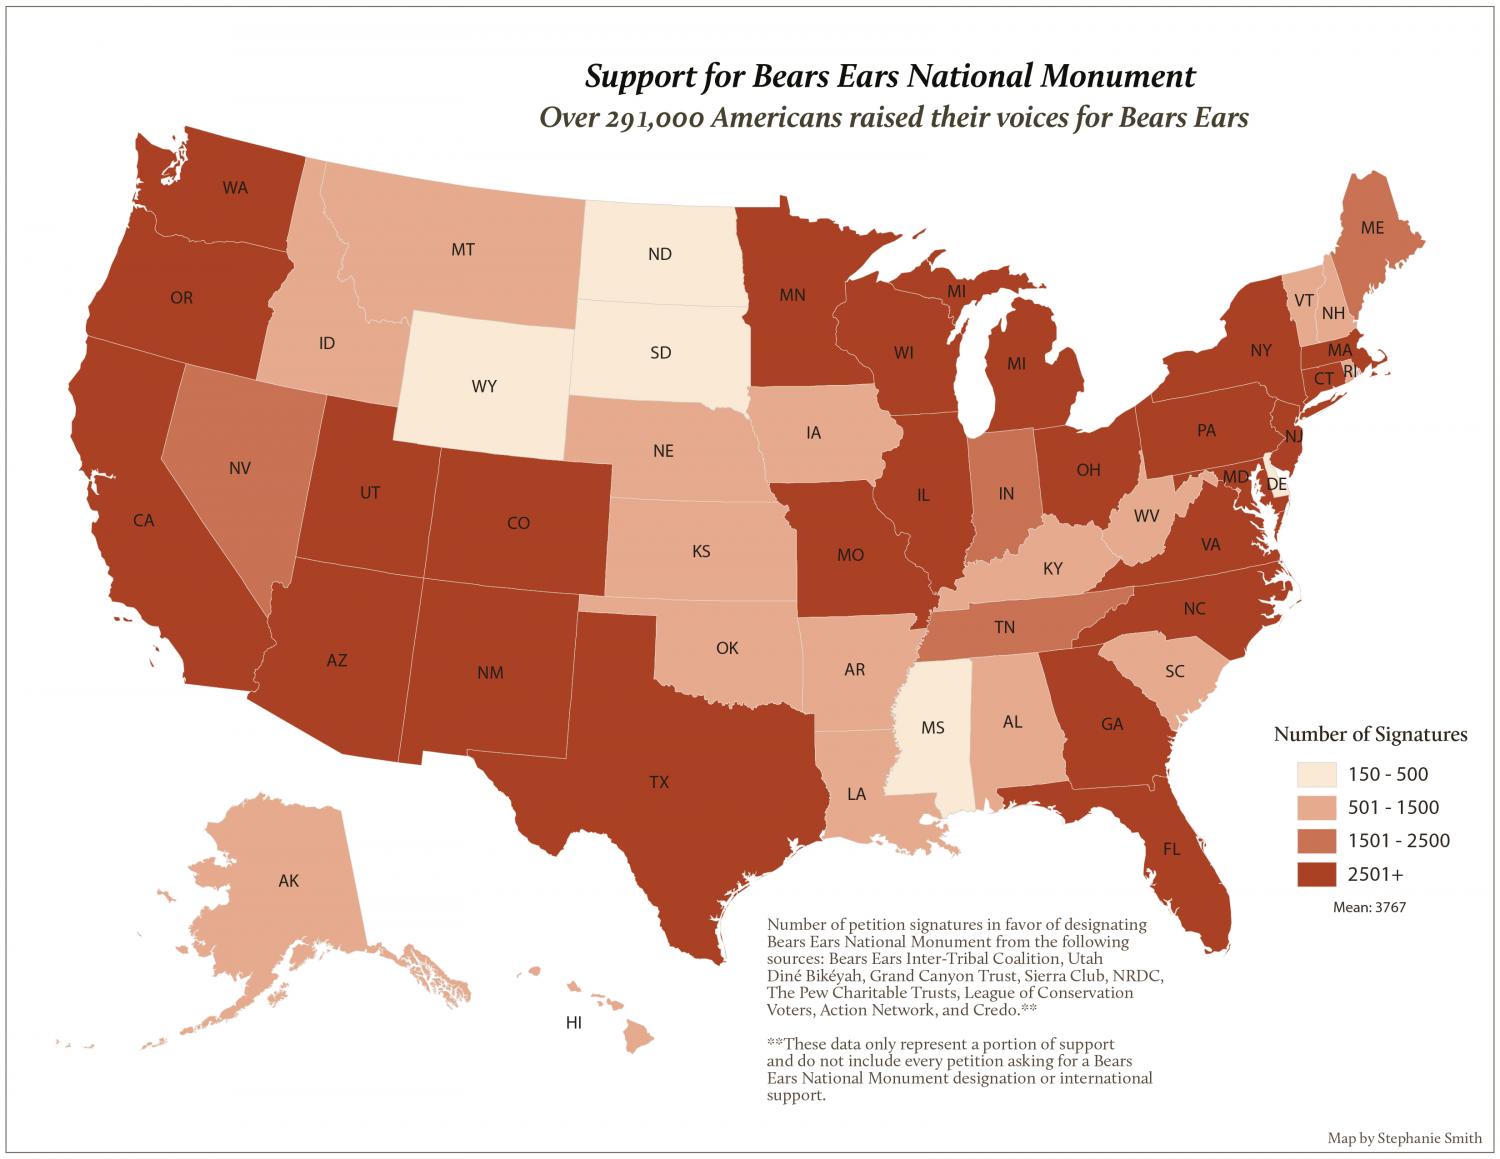 Map of U.S. support for Bears Ears National Monument